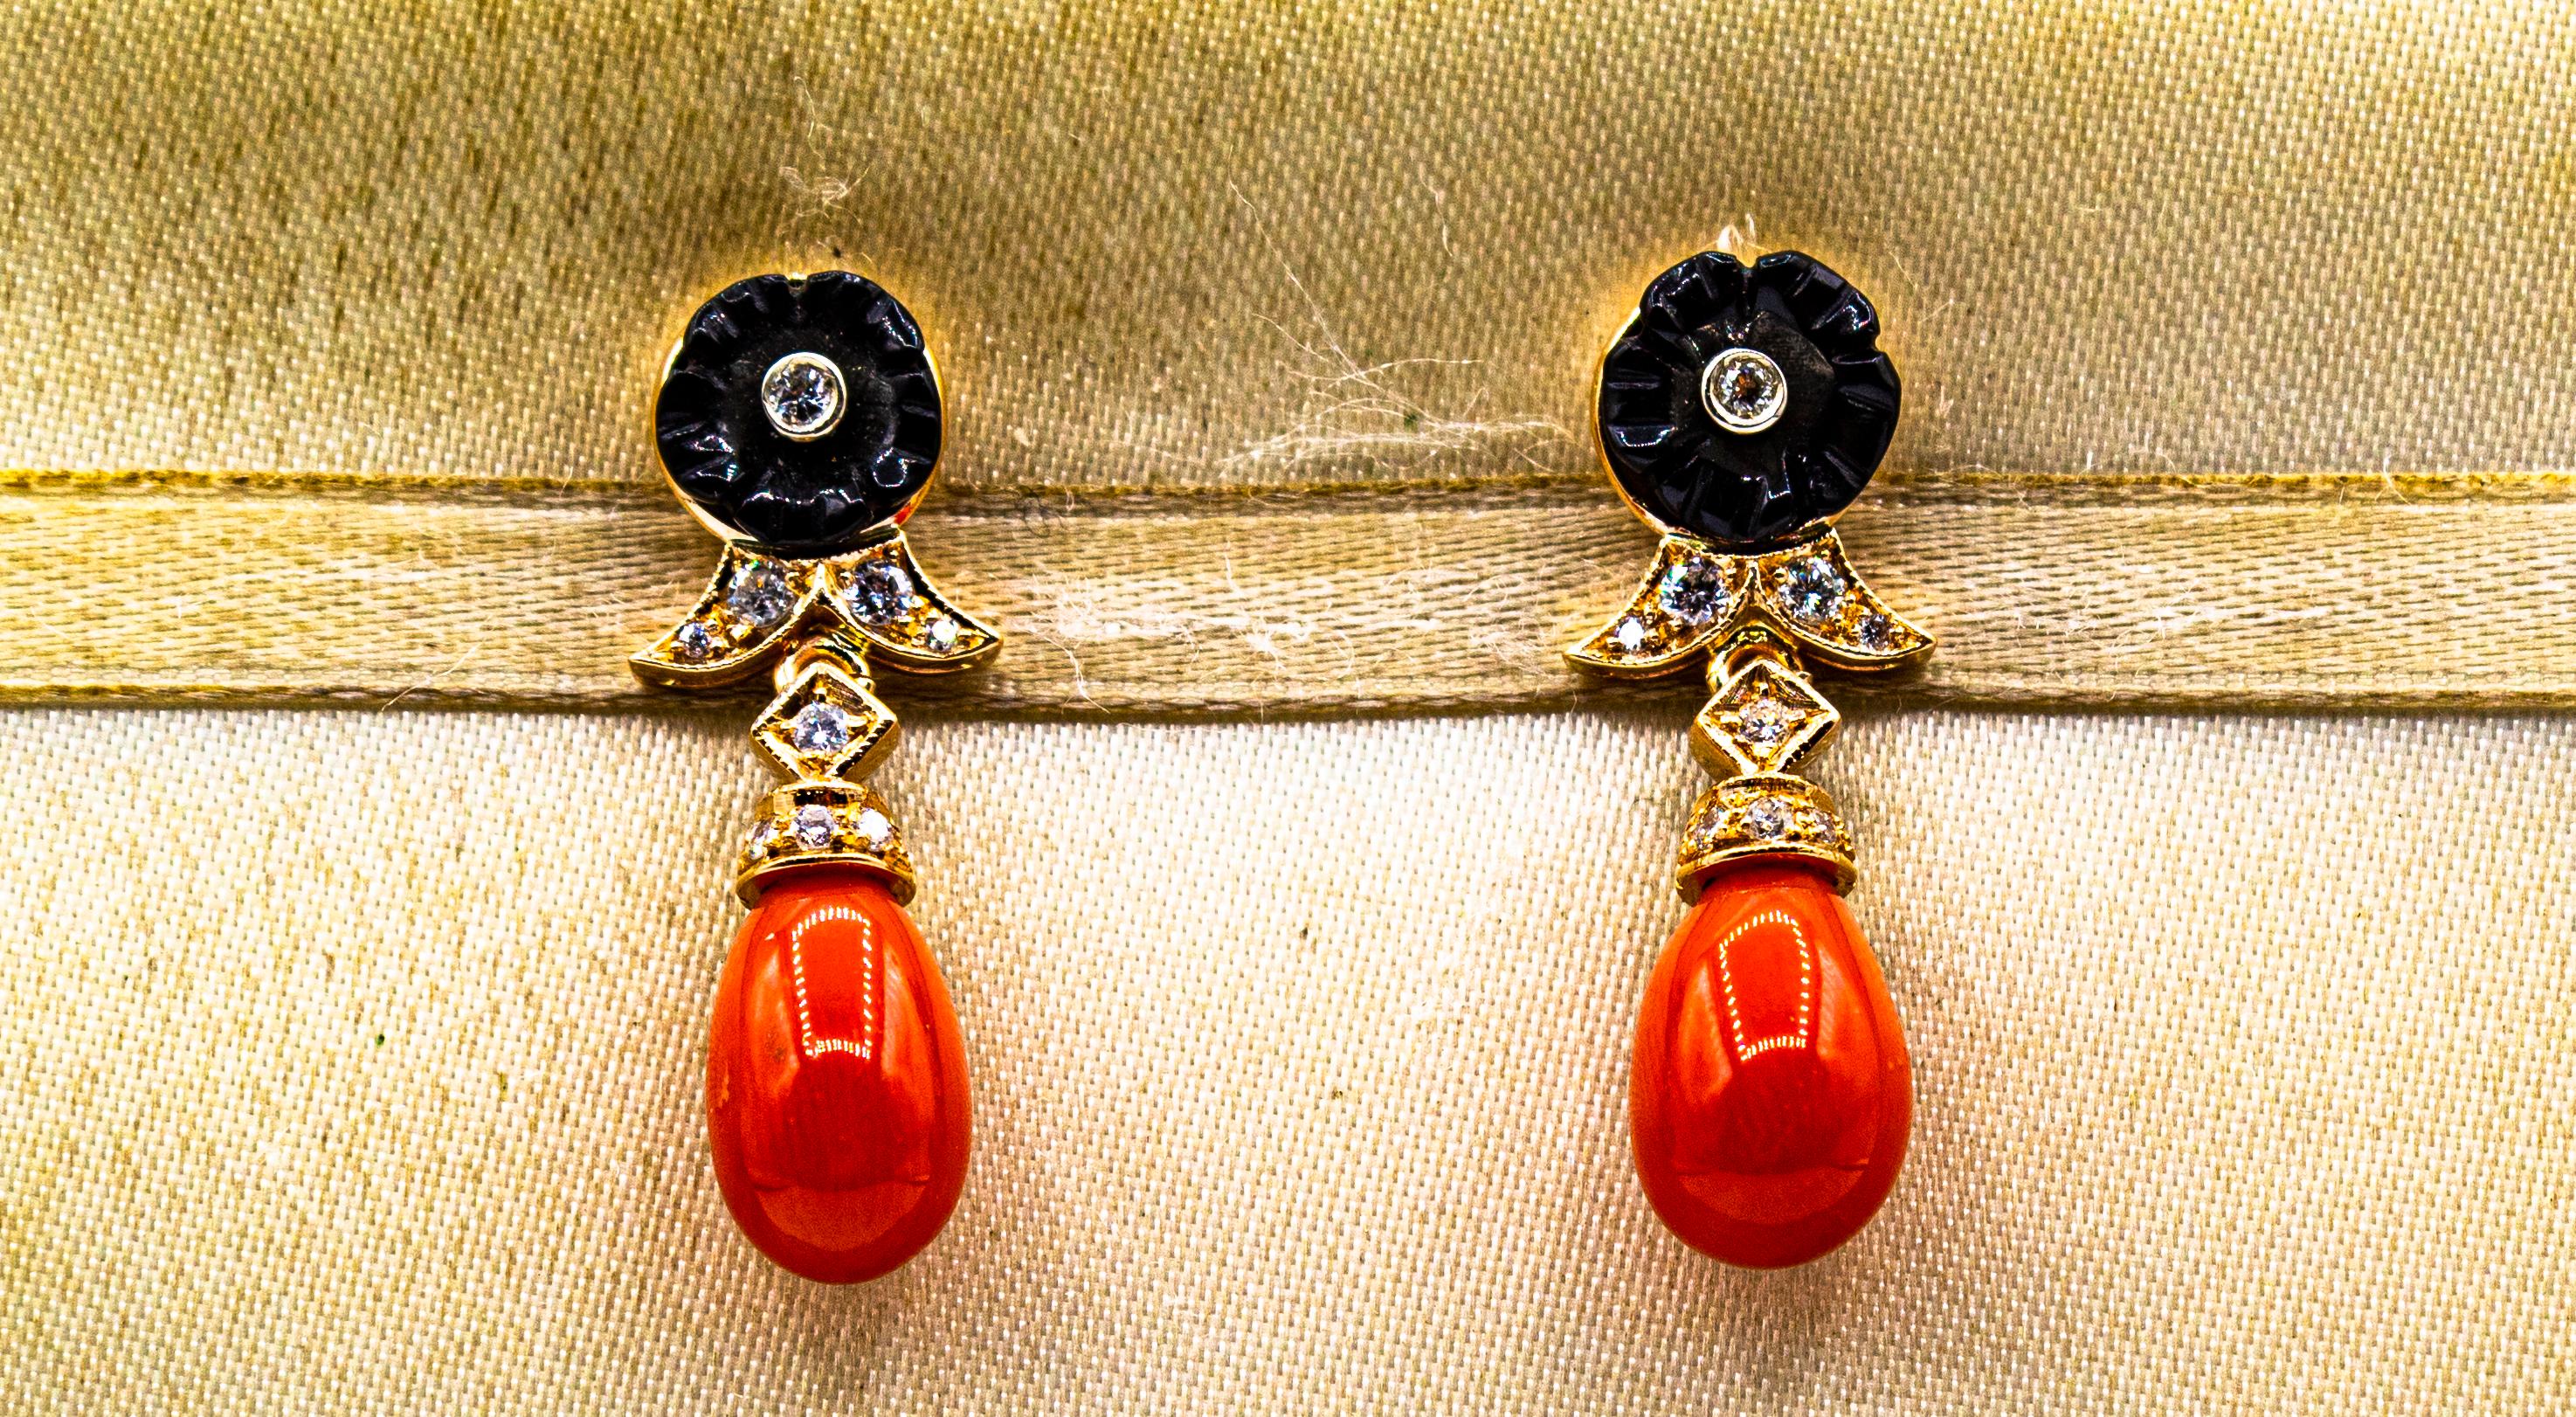 MAYNIER ET PINÇON, A pair of coral, enamel and diamond ear pendants, 1920 -  1925 | Symbolic & Chase